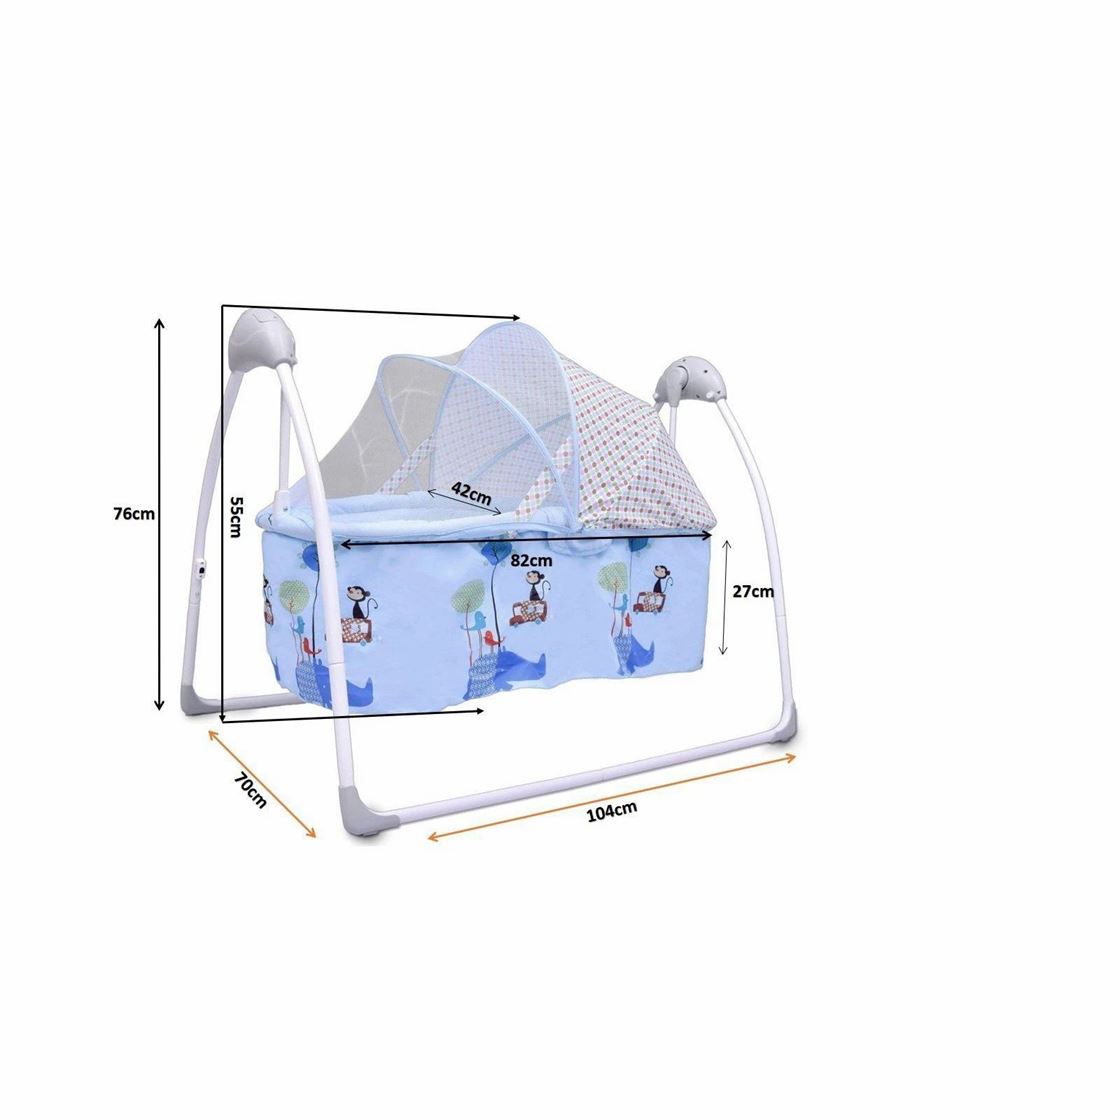 R FOR RABBIT Lullabies Baby Cradle with Remote Control & Mosquito Net - Blue